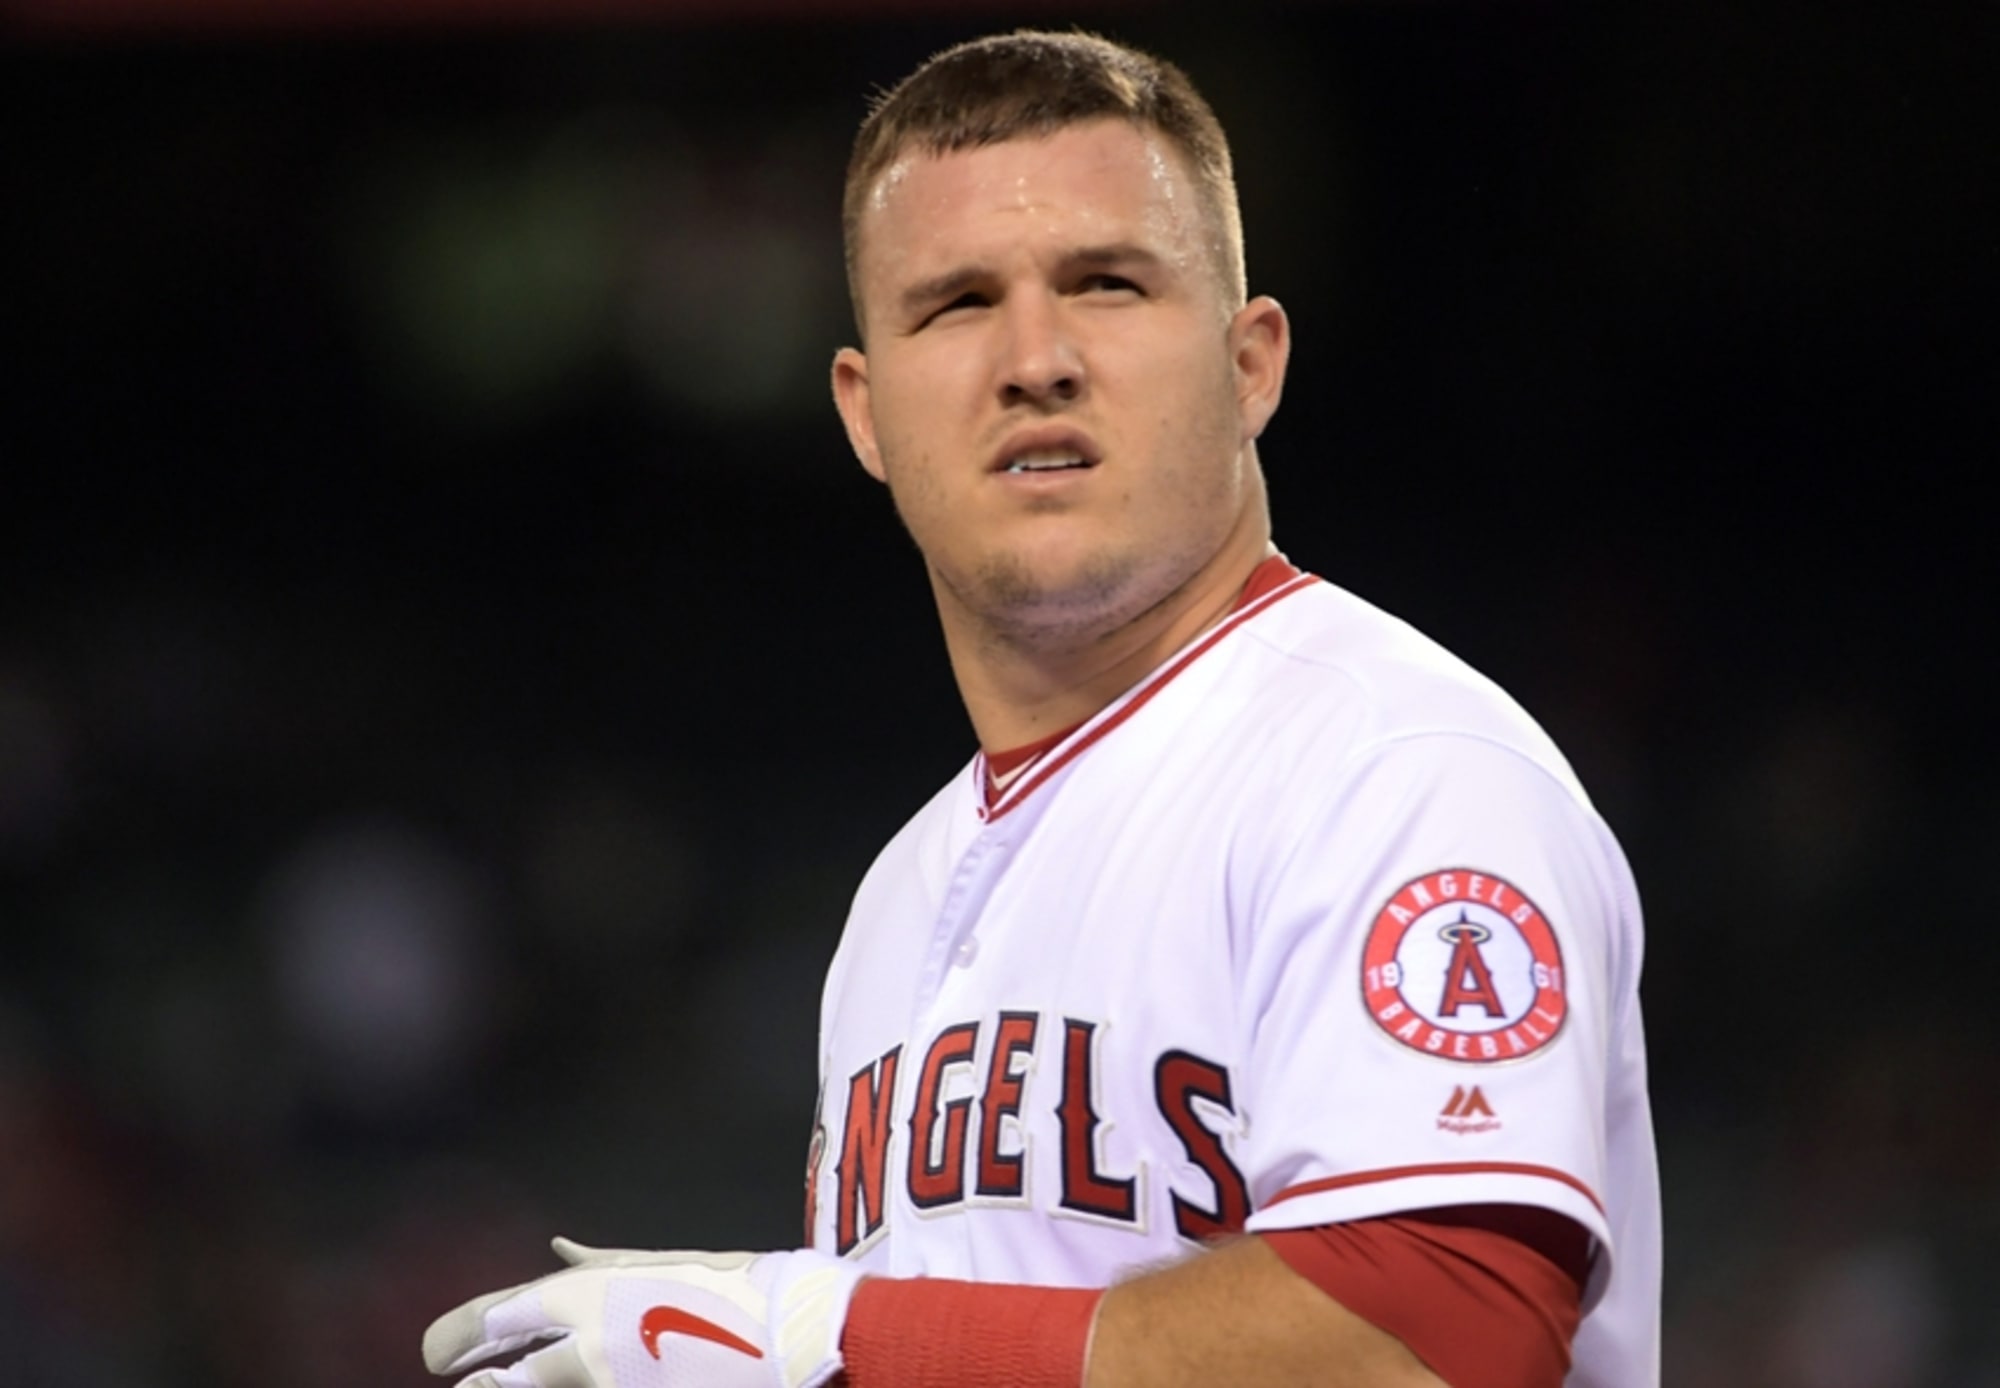 Angels' Mike Trout, Cubs' Kris Bryant win baseball's MVP awards